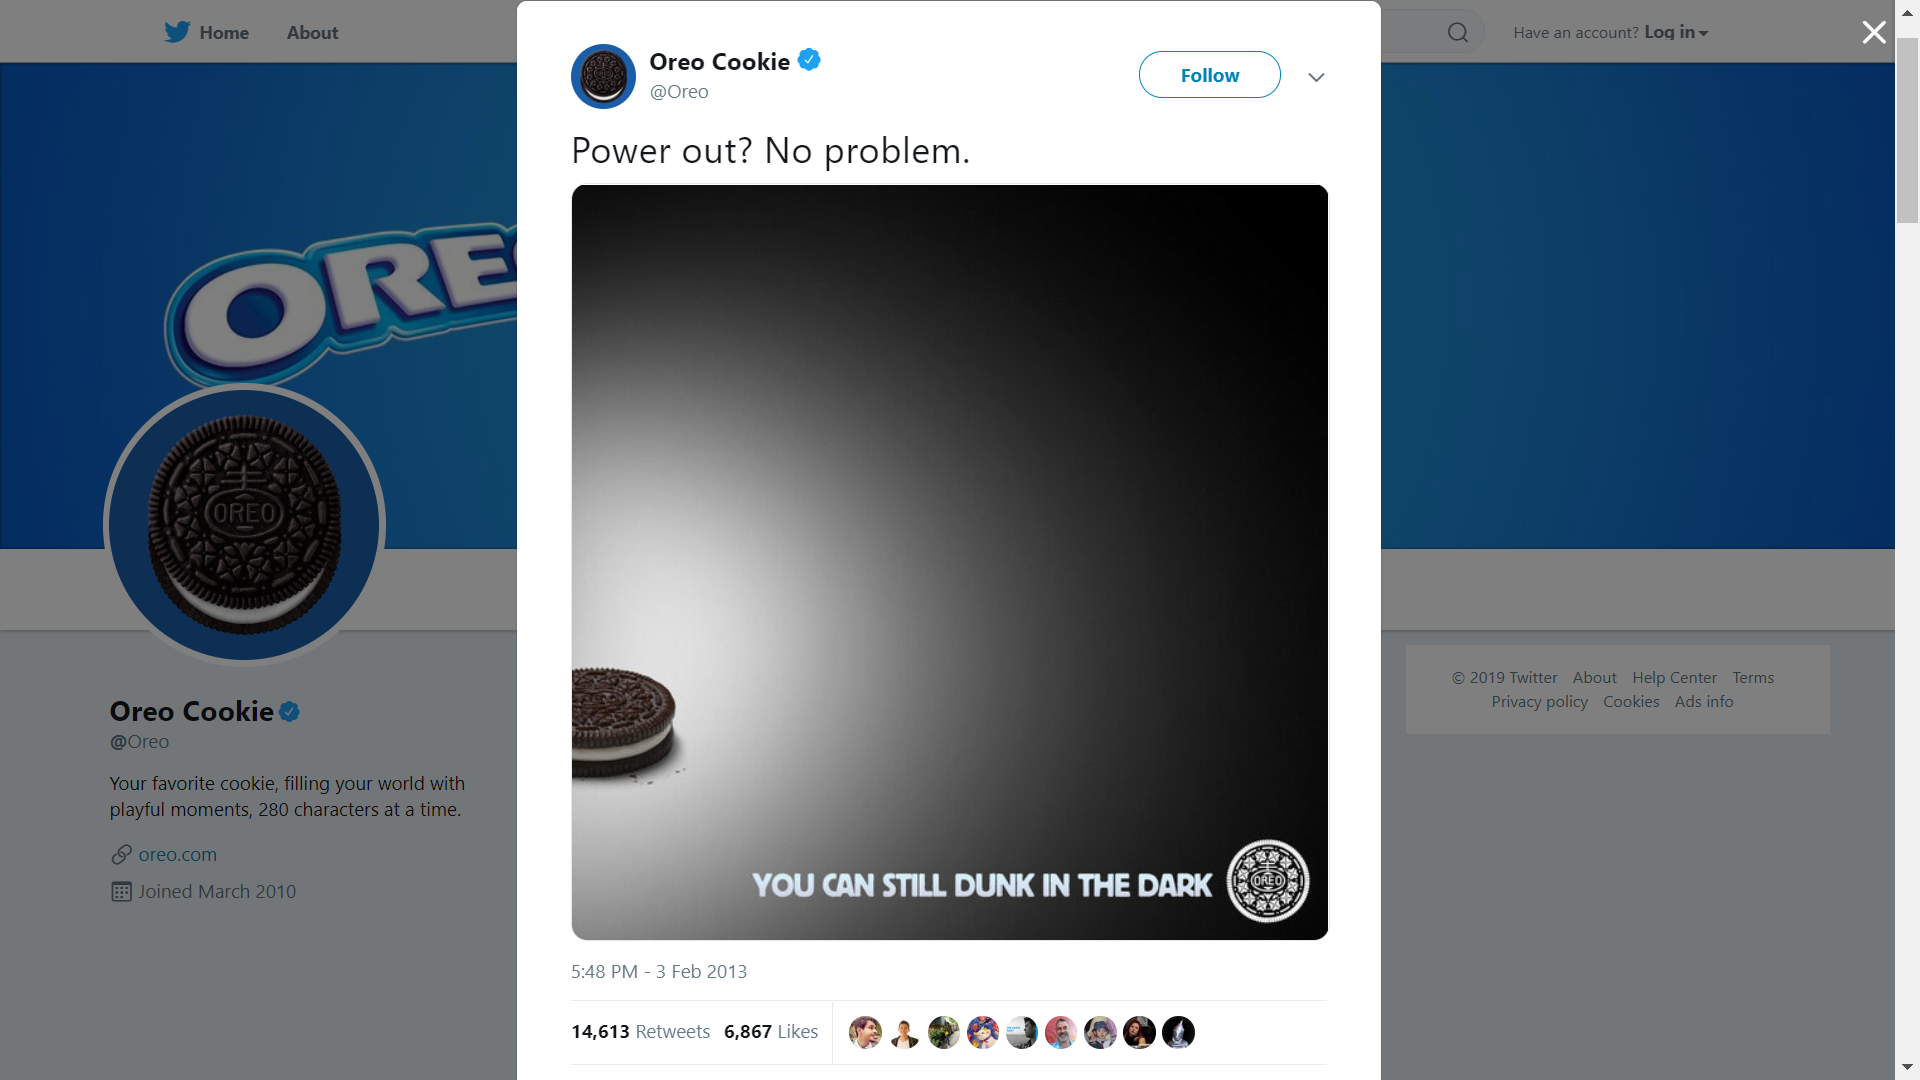 Twitter Marketing - Success Story: Oreo's Super Bowl tweet (dunking time) capitalizing on a power outage.